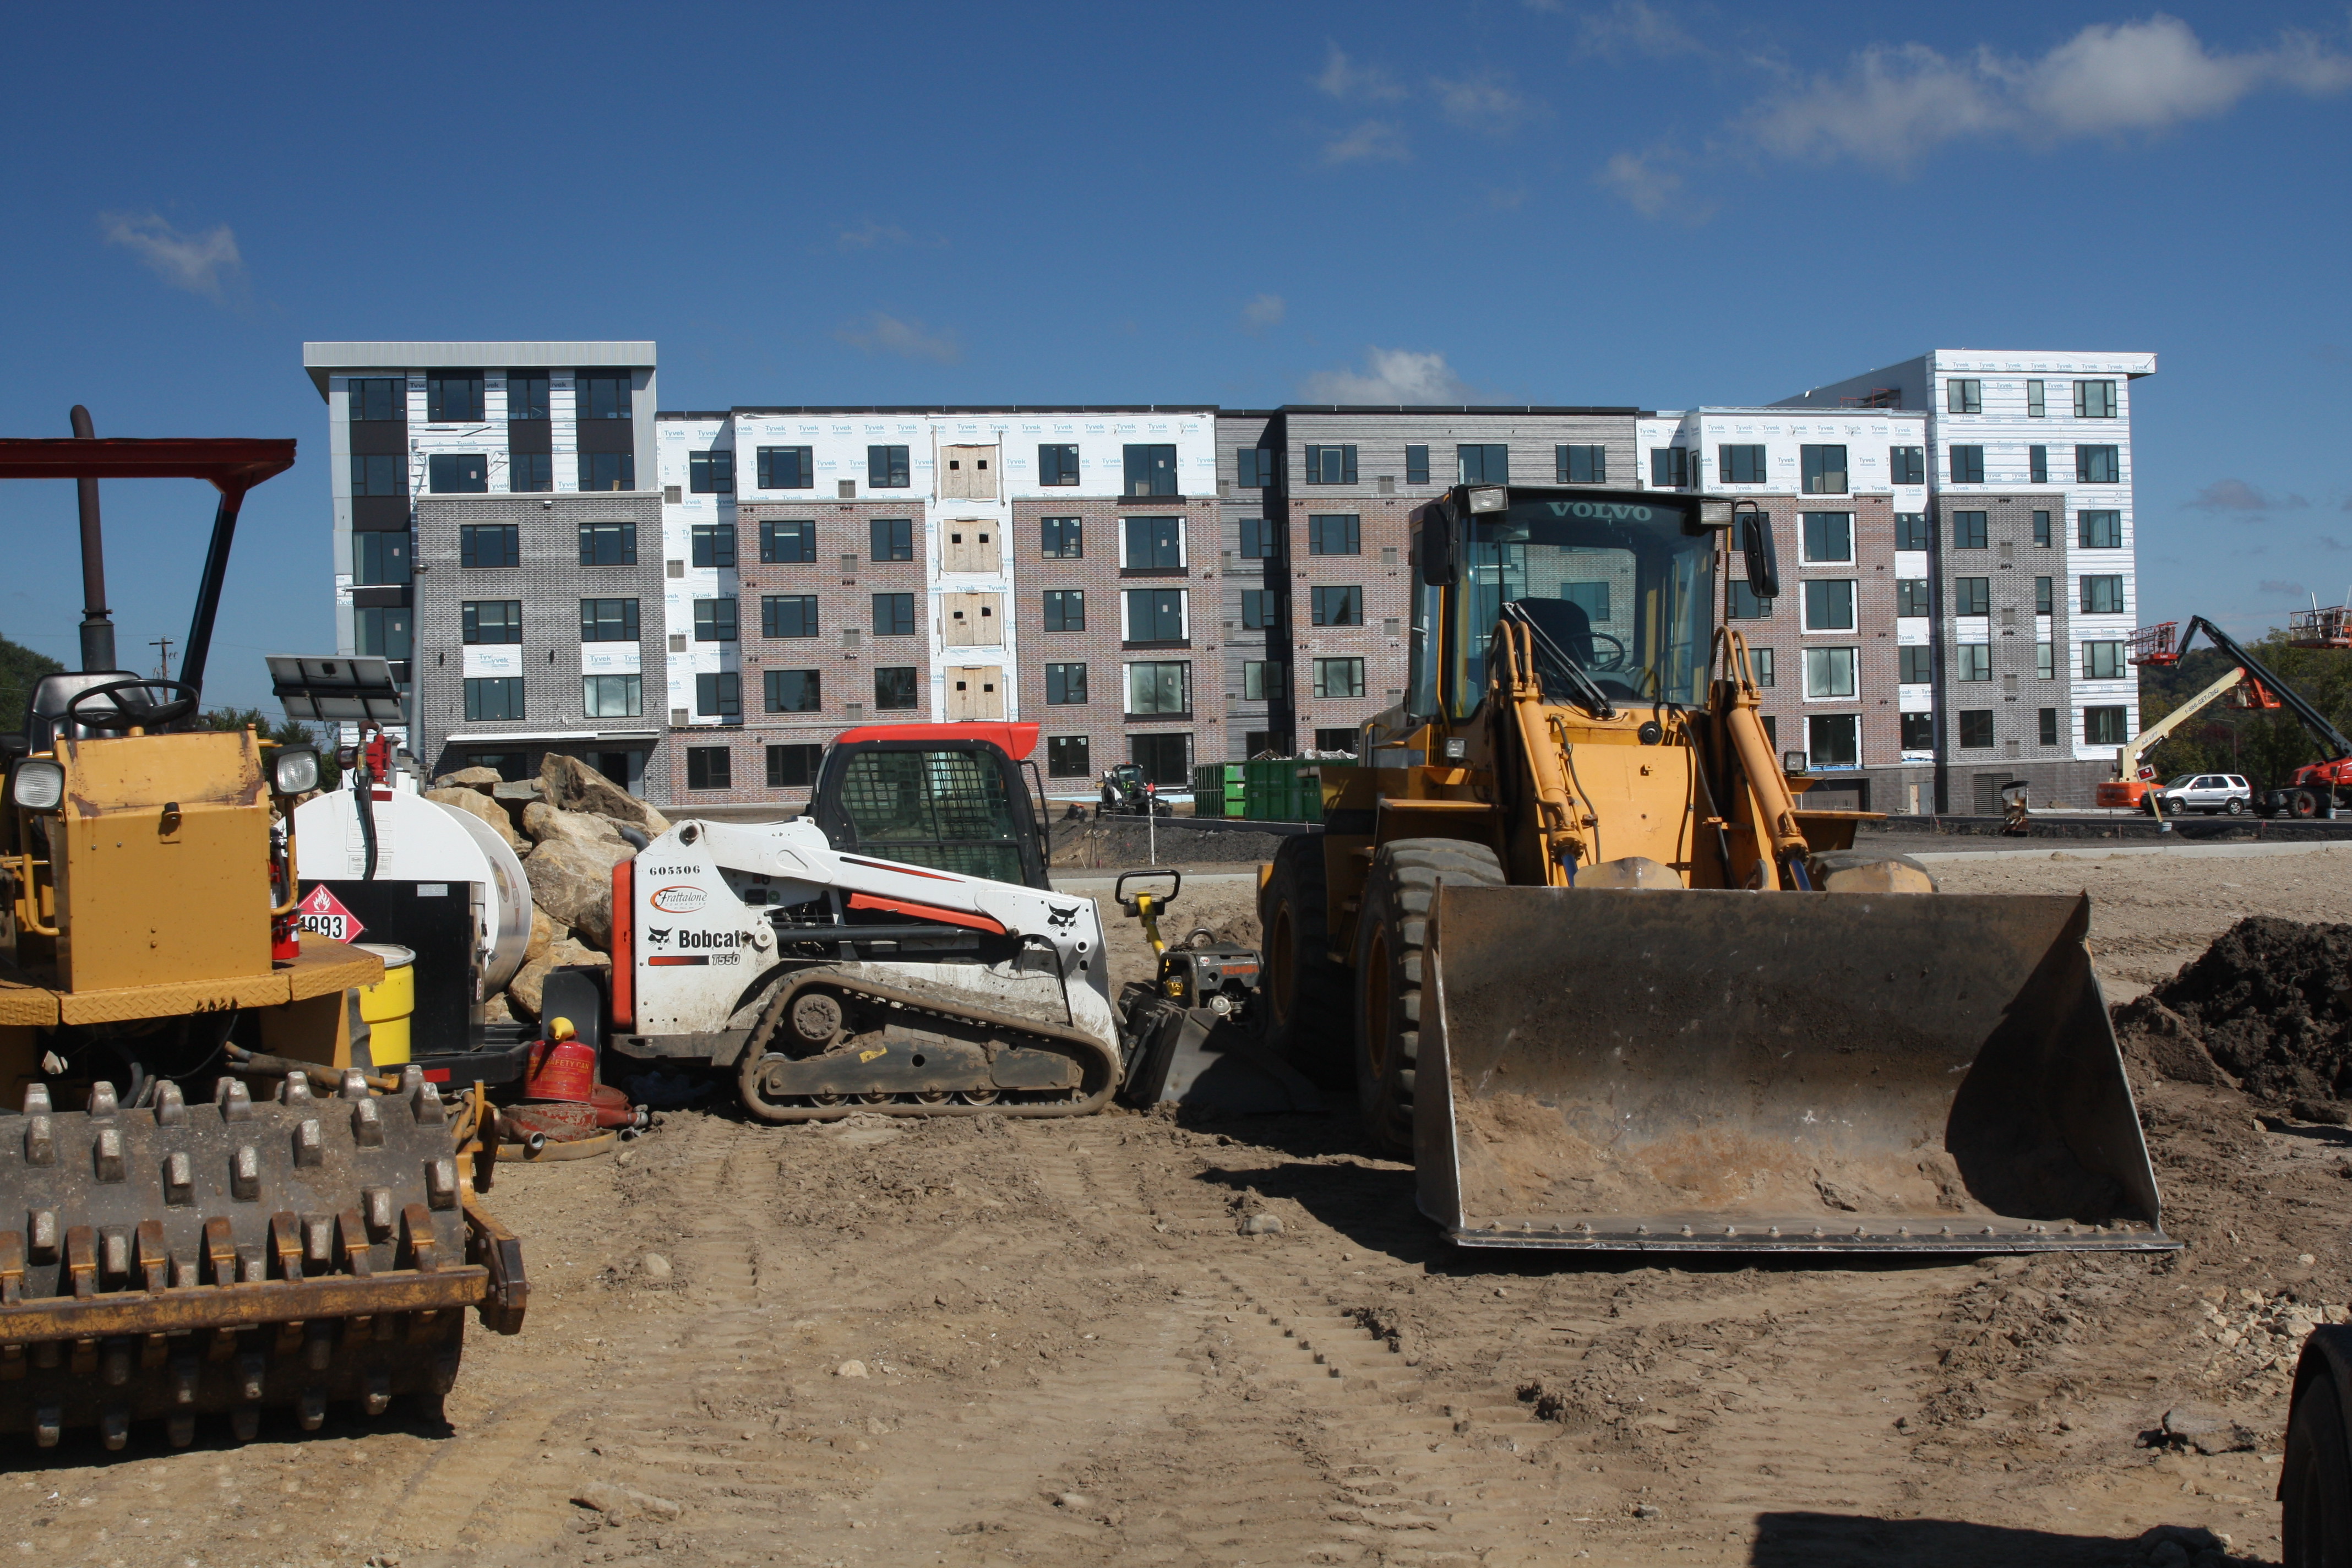 Construction equipment was parked in a way to reduce the chance the Bobcat or trailer with the white tank would be stolen. The V2 Apartments are in the background.